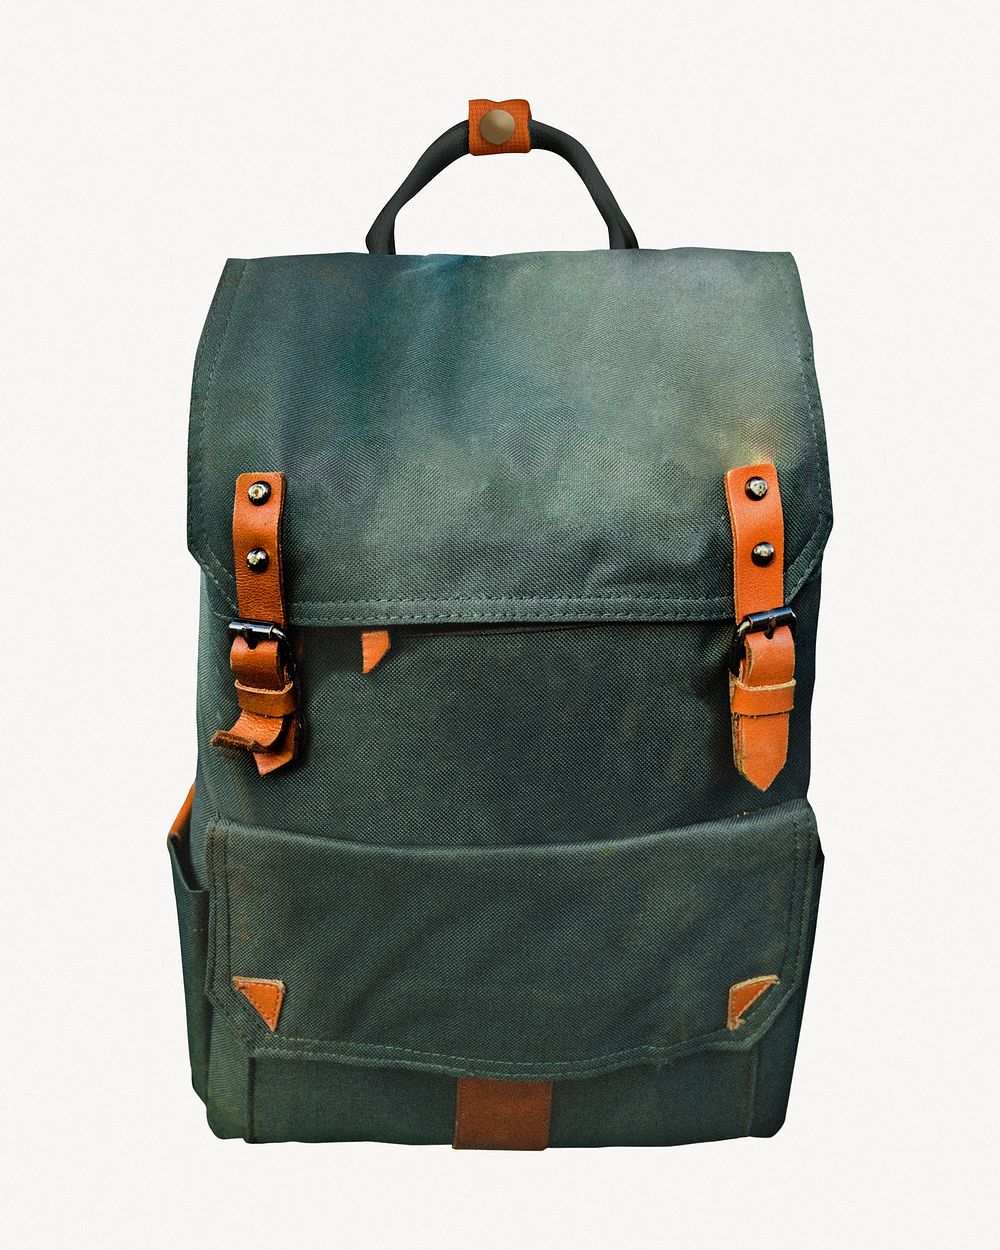 Green traveler's backpack, isolated apparel image